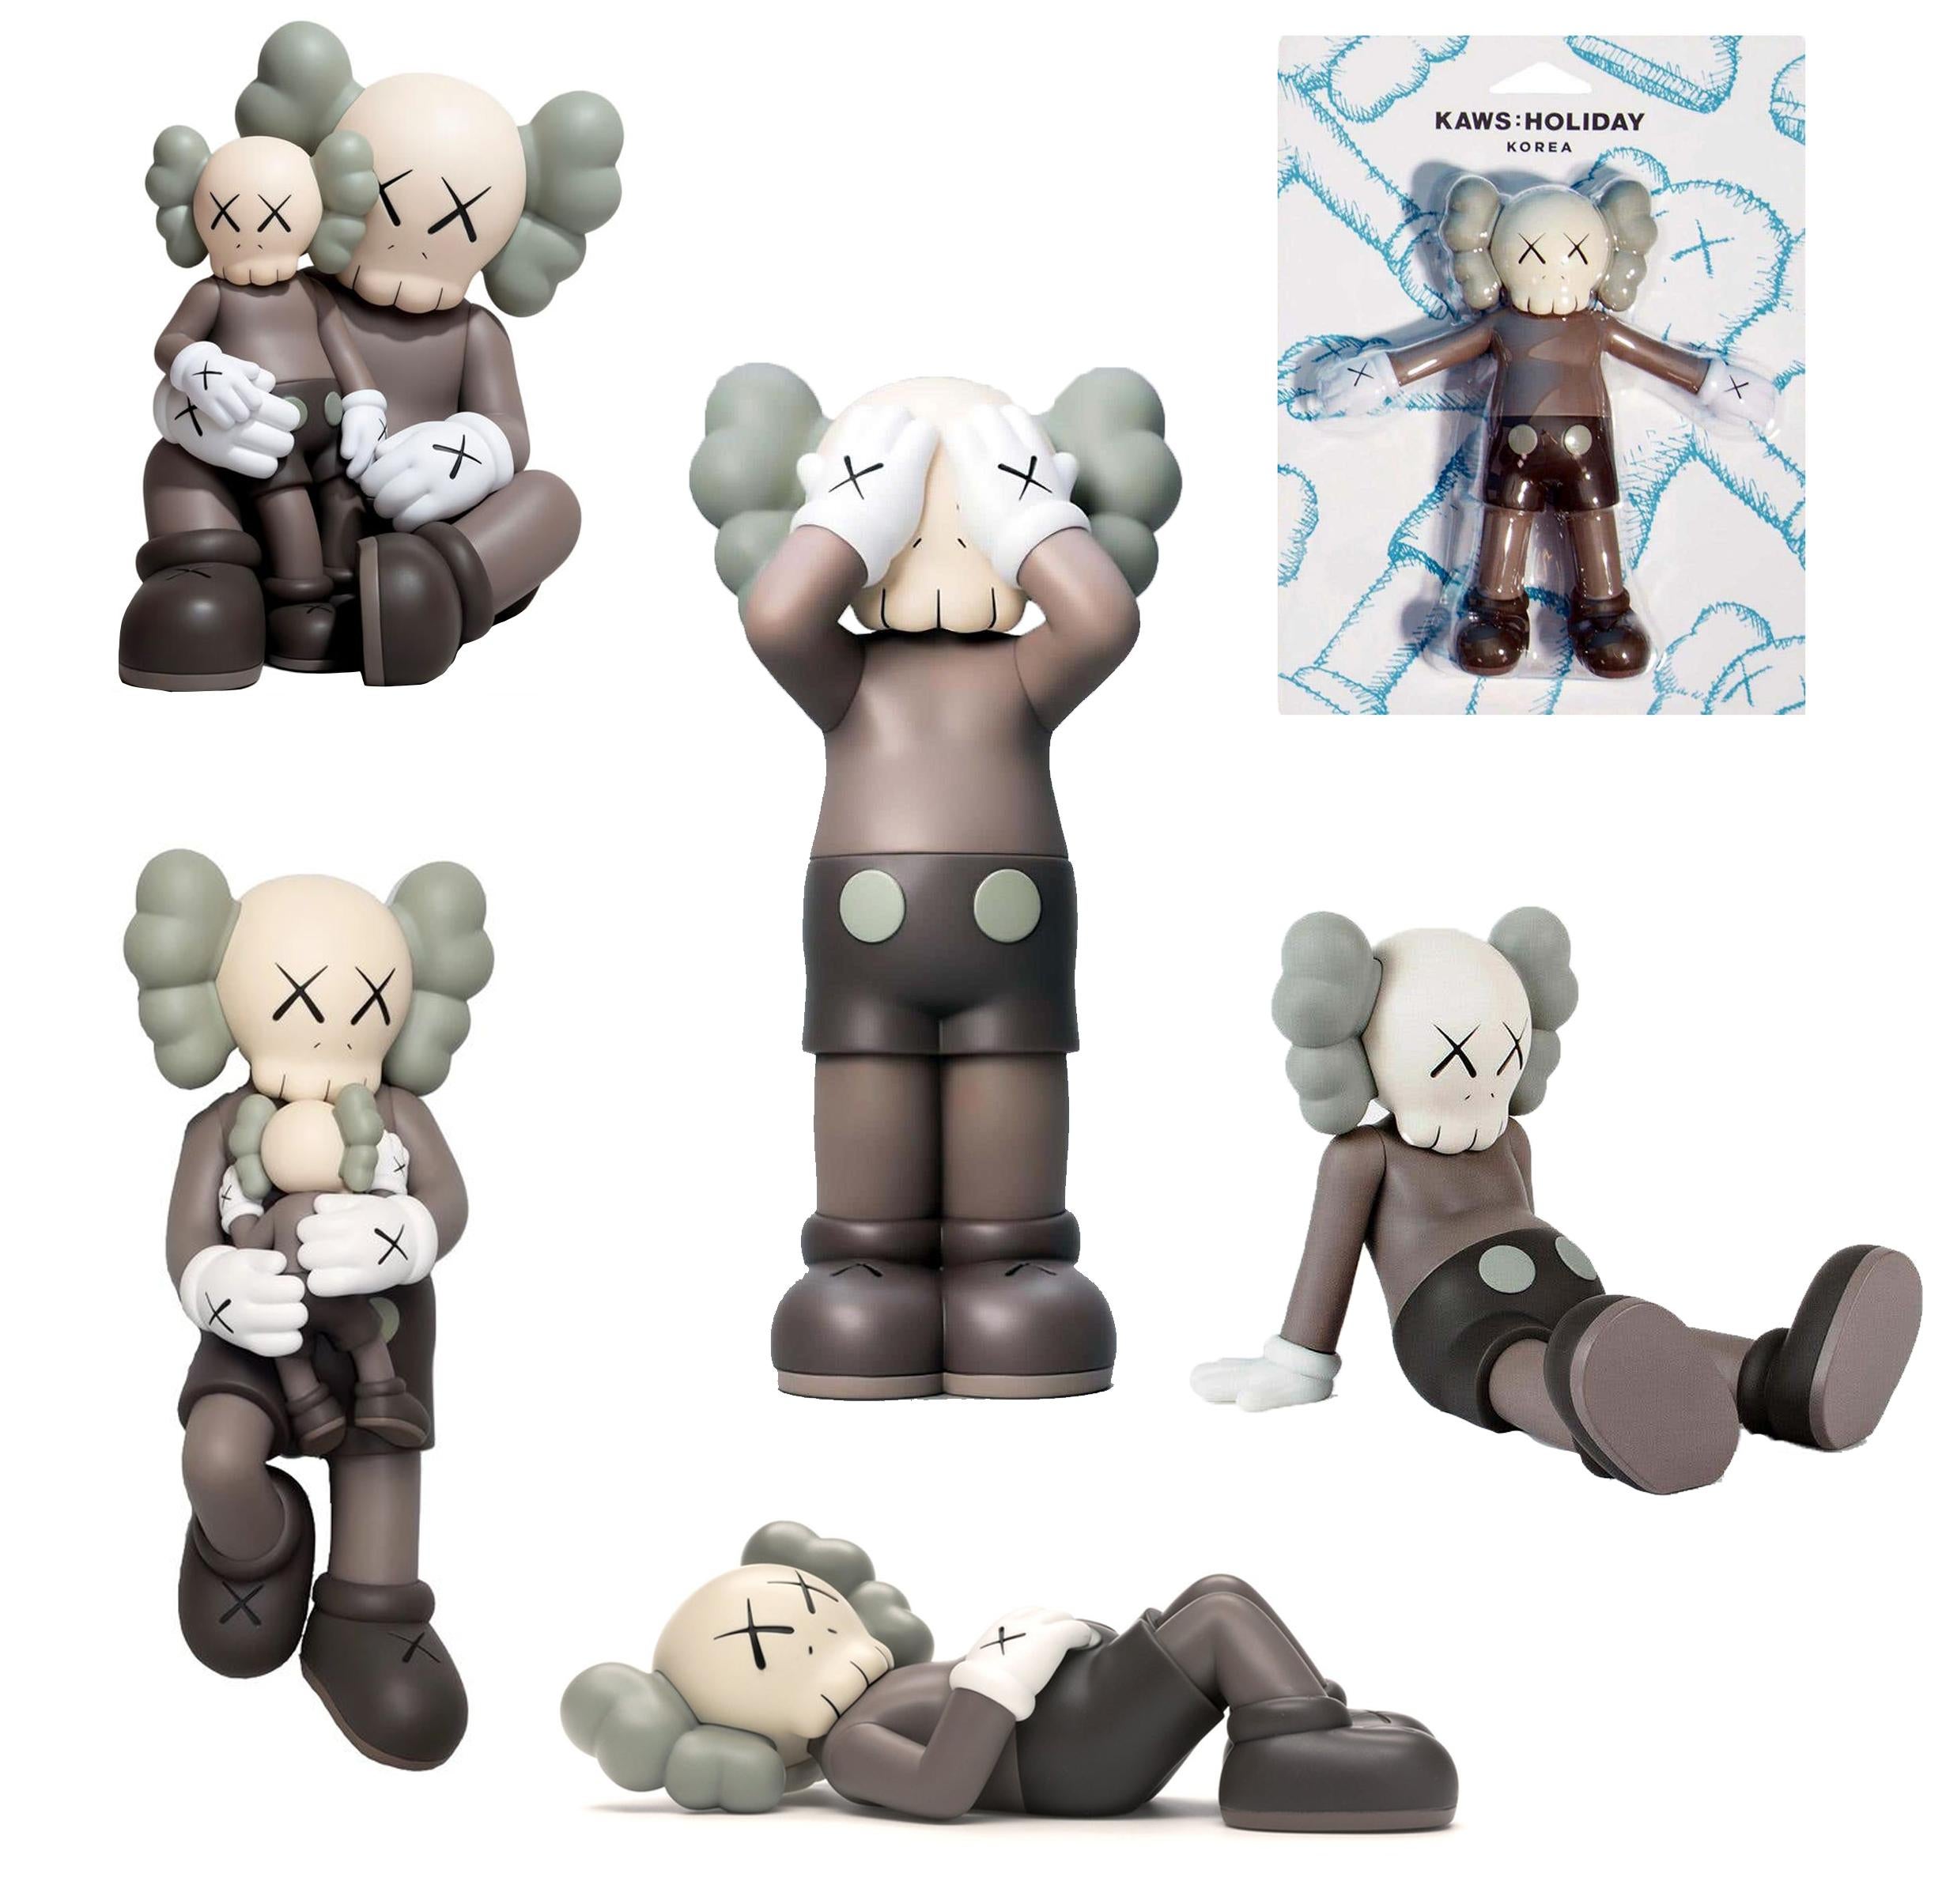 KAWS Companion 2019-2022:
A curated set of 6 individual Brown KAWS Companions new & unopened in original packaging. These KAWS holiday companions were born out of KAWS' world famous rotating series of large scale outdoor public exhibitions featuring